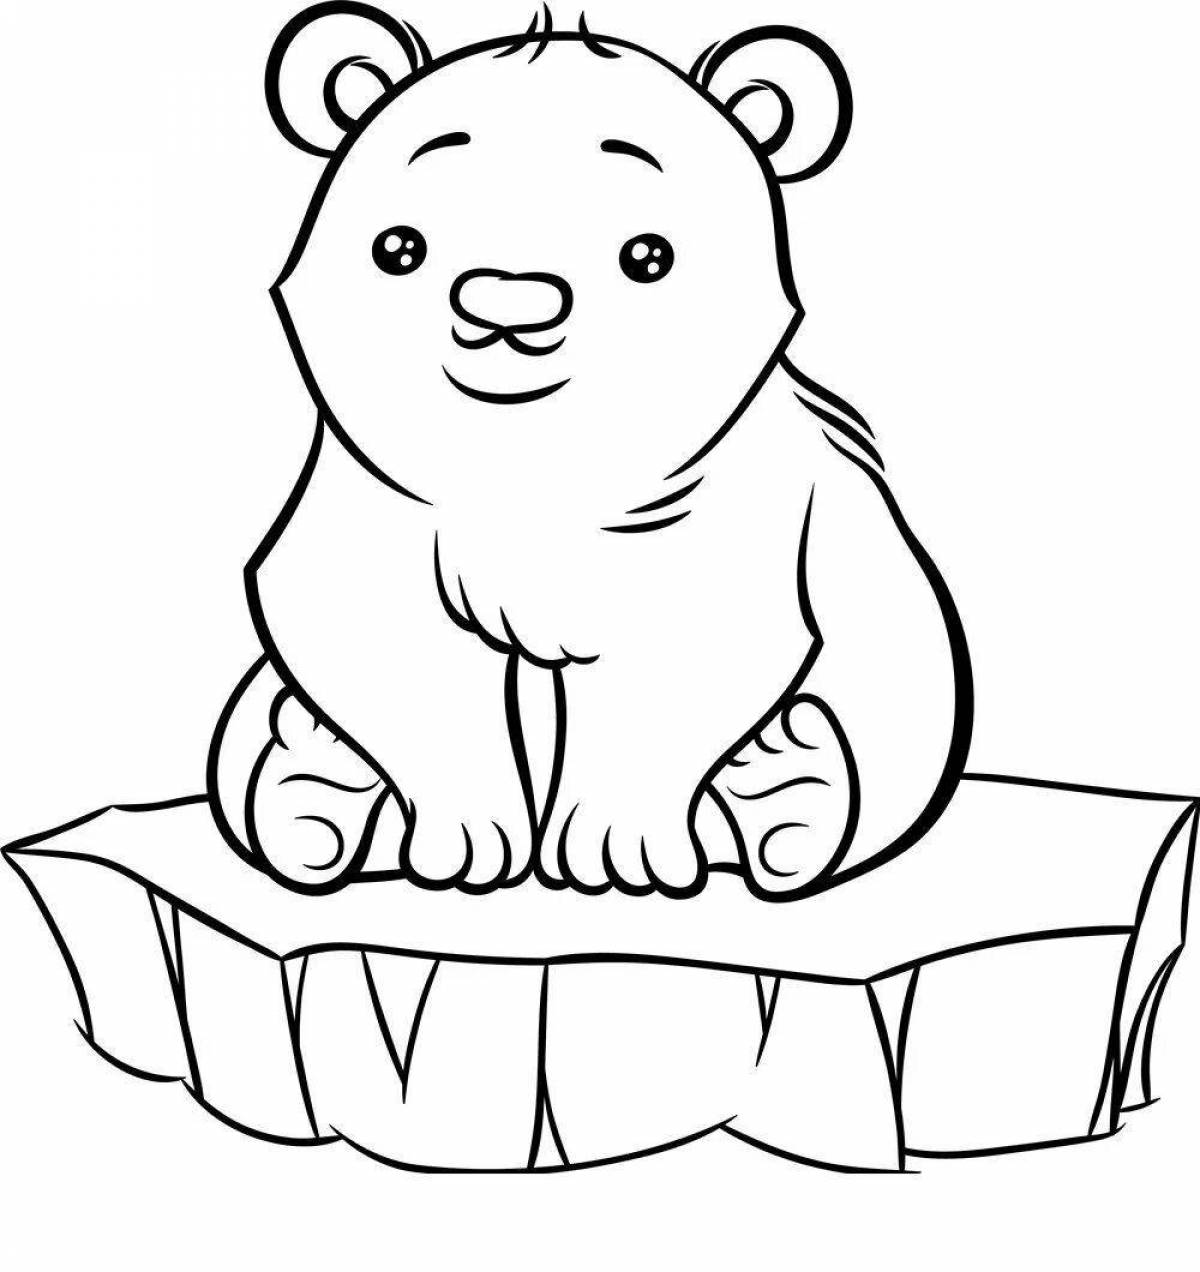 Exquisite northern bear coloring book